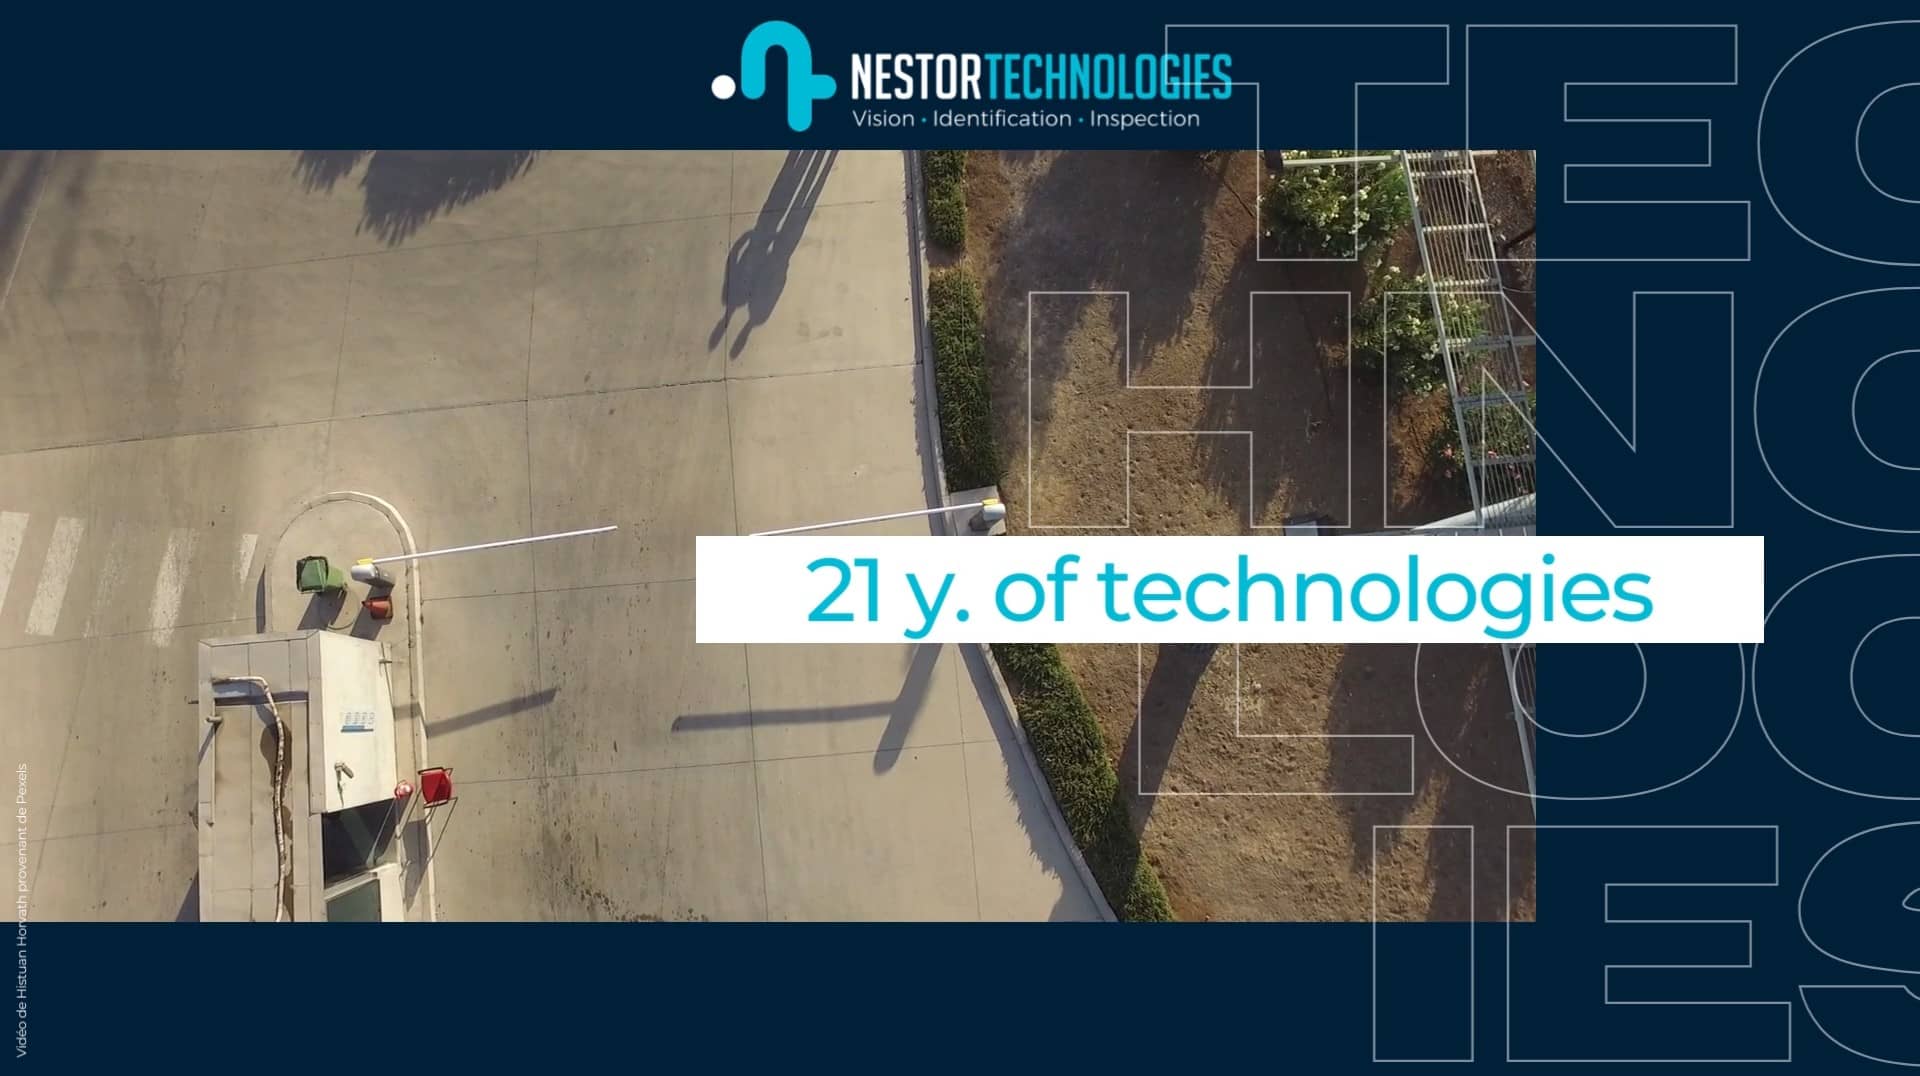 21st year of technologies